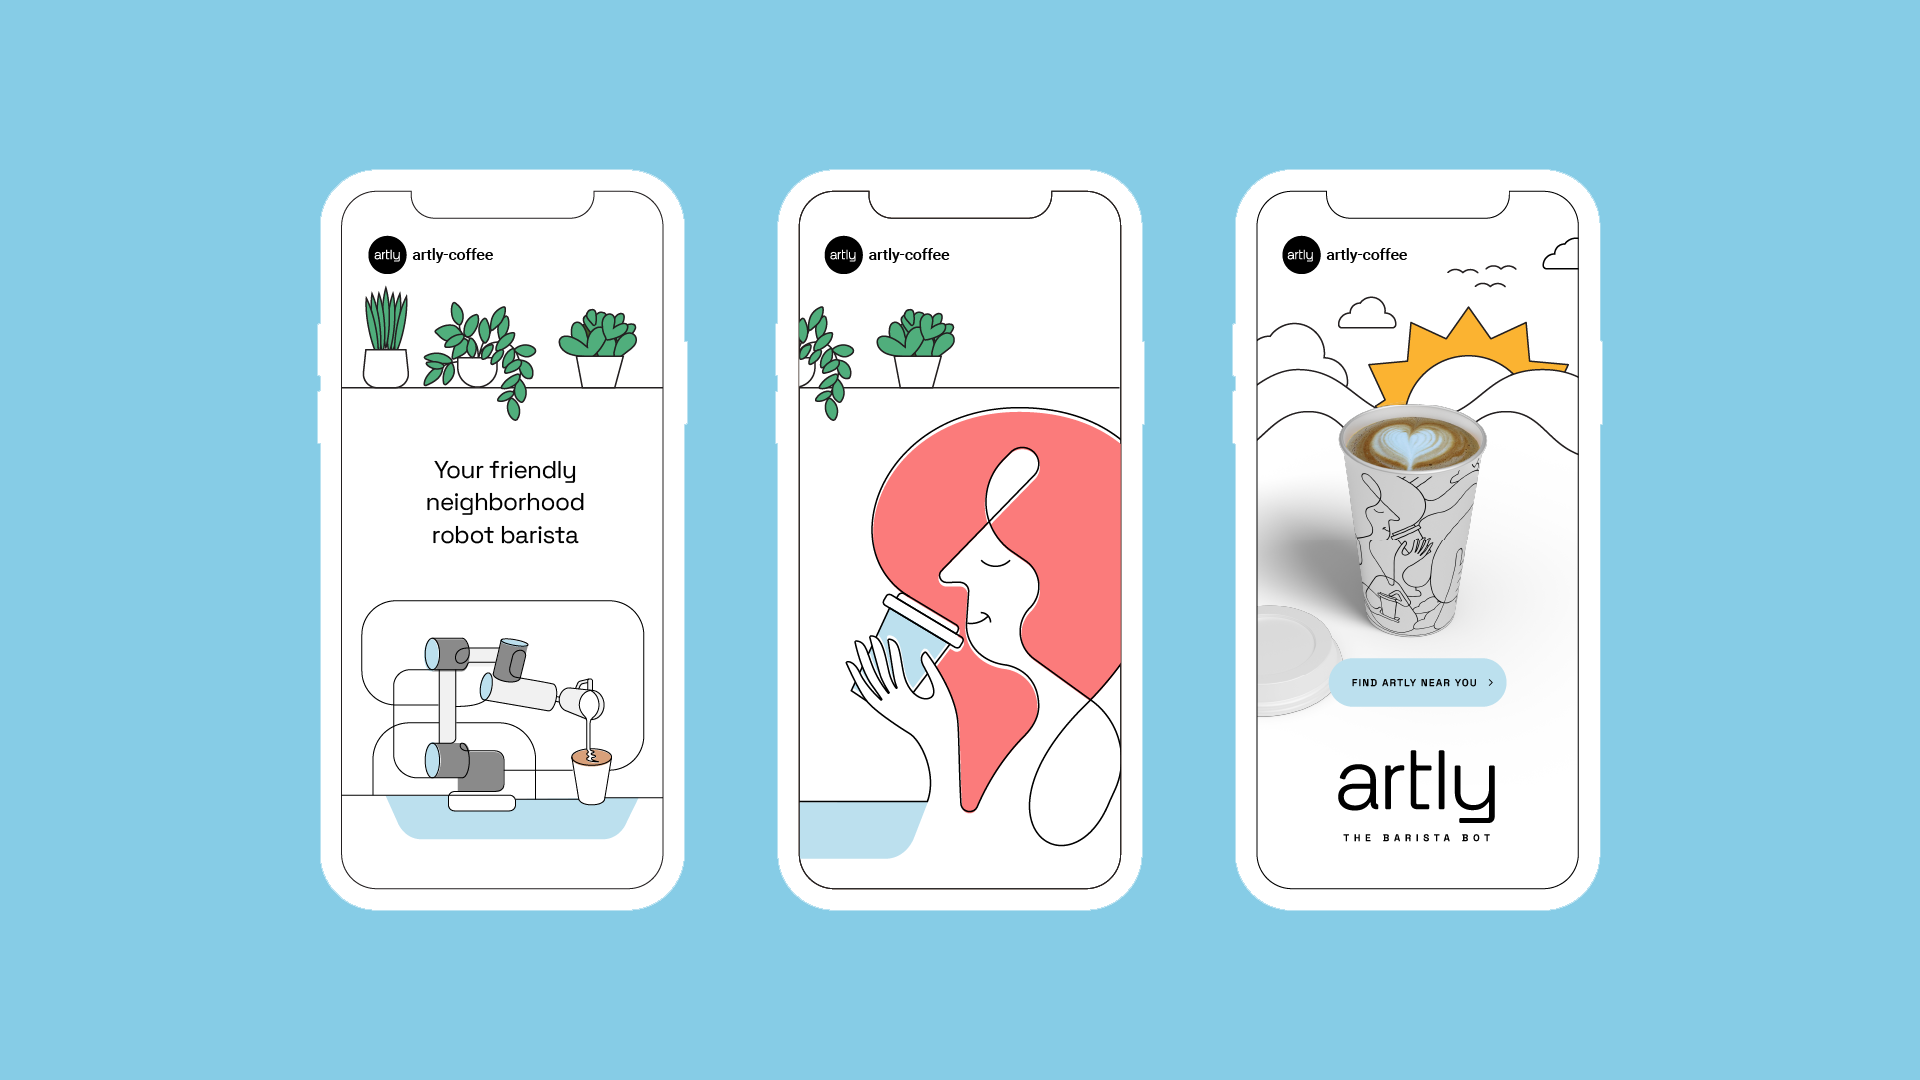 A mockup of three illustrated social media posts sit against a blue background. The first mockup features the phrase “Your friendly neighborhood robot barista” surrounded by plants and the robot arm. The second features a woman happily sipping coffee. The third features a coffee cup with the sun rising behind it.